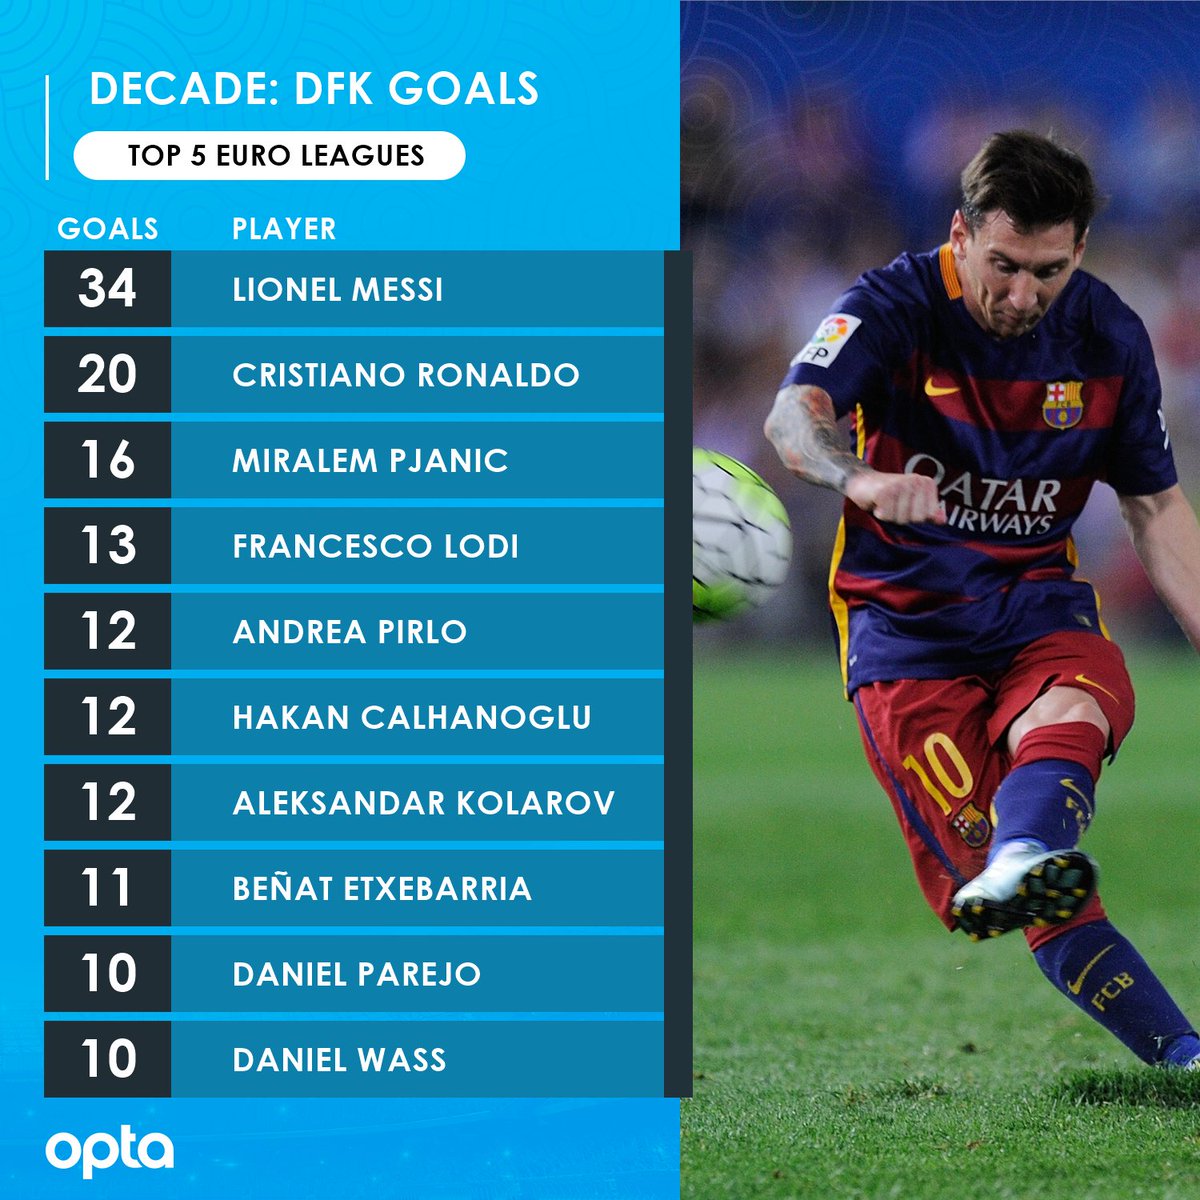 Optajoe 34 Lionel Messi Scored 34 Direct Free Kick Goals This Decade In League Competition This Tally Was 14 More Than Any Other Player Within The Top 5 European Leagues